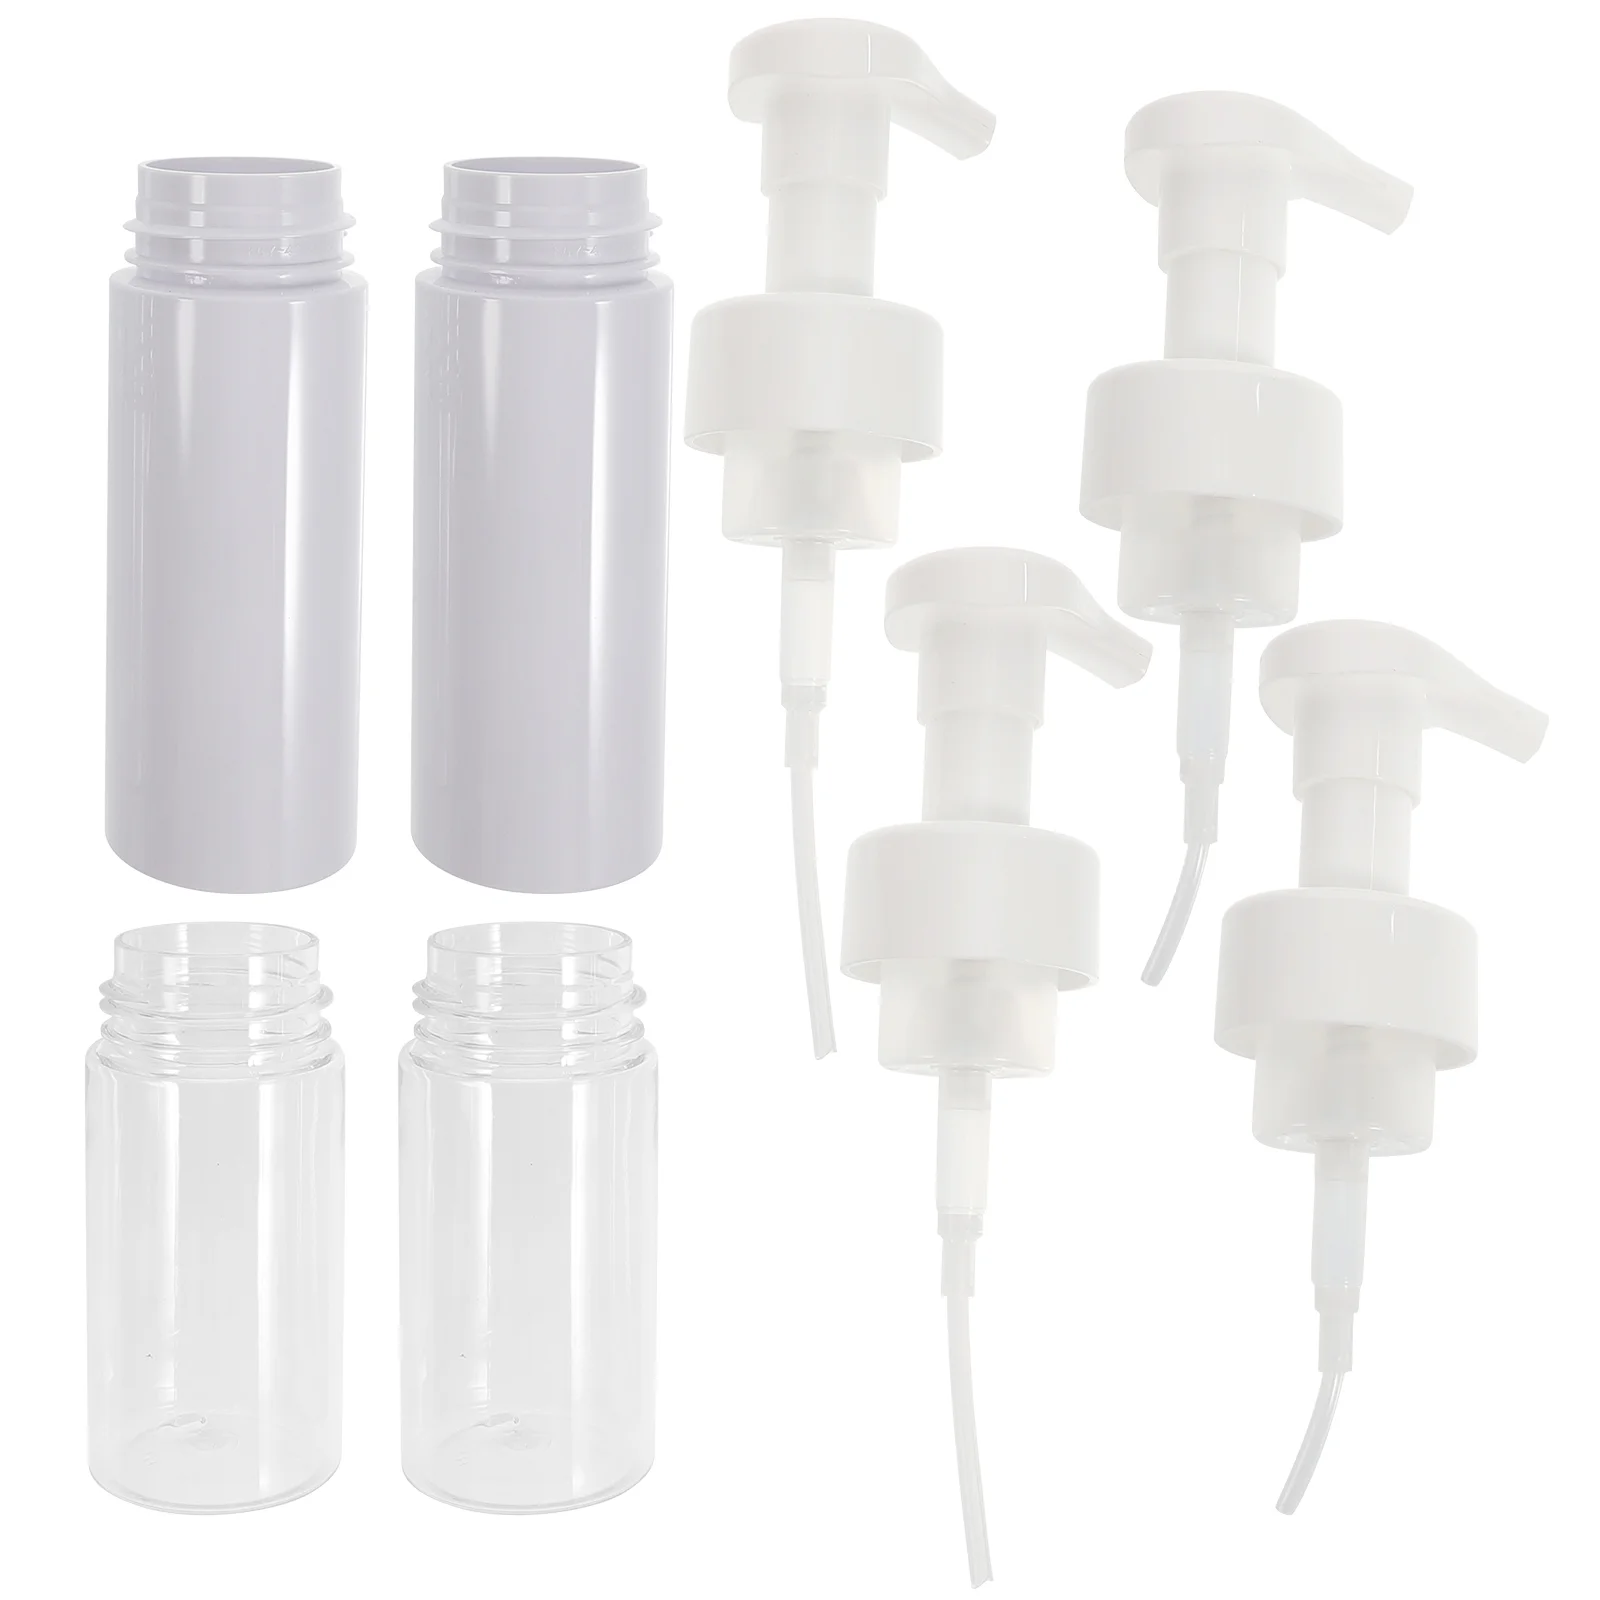 

4Pcs Bubble Flask Cleanser Bottles Sub Packing Bottles Press-type Bottle Bubble Bottles for Home Outdoor